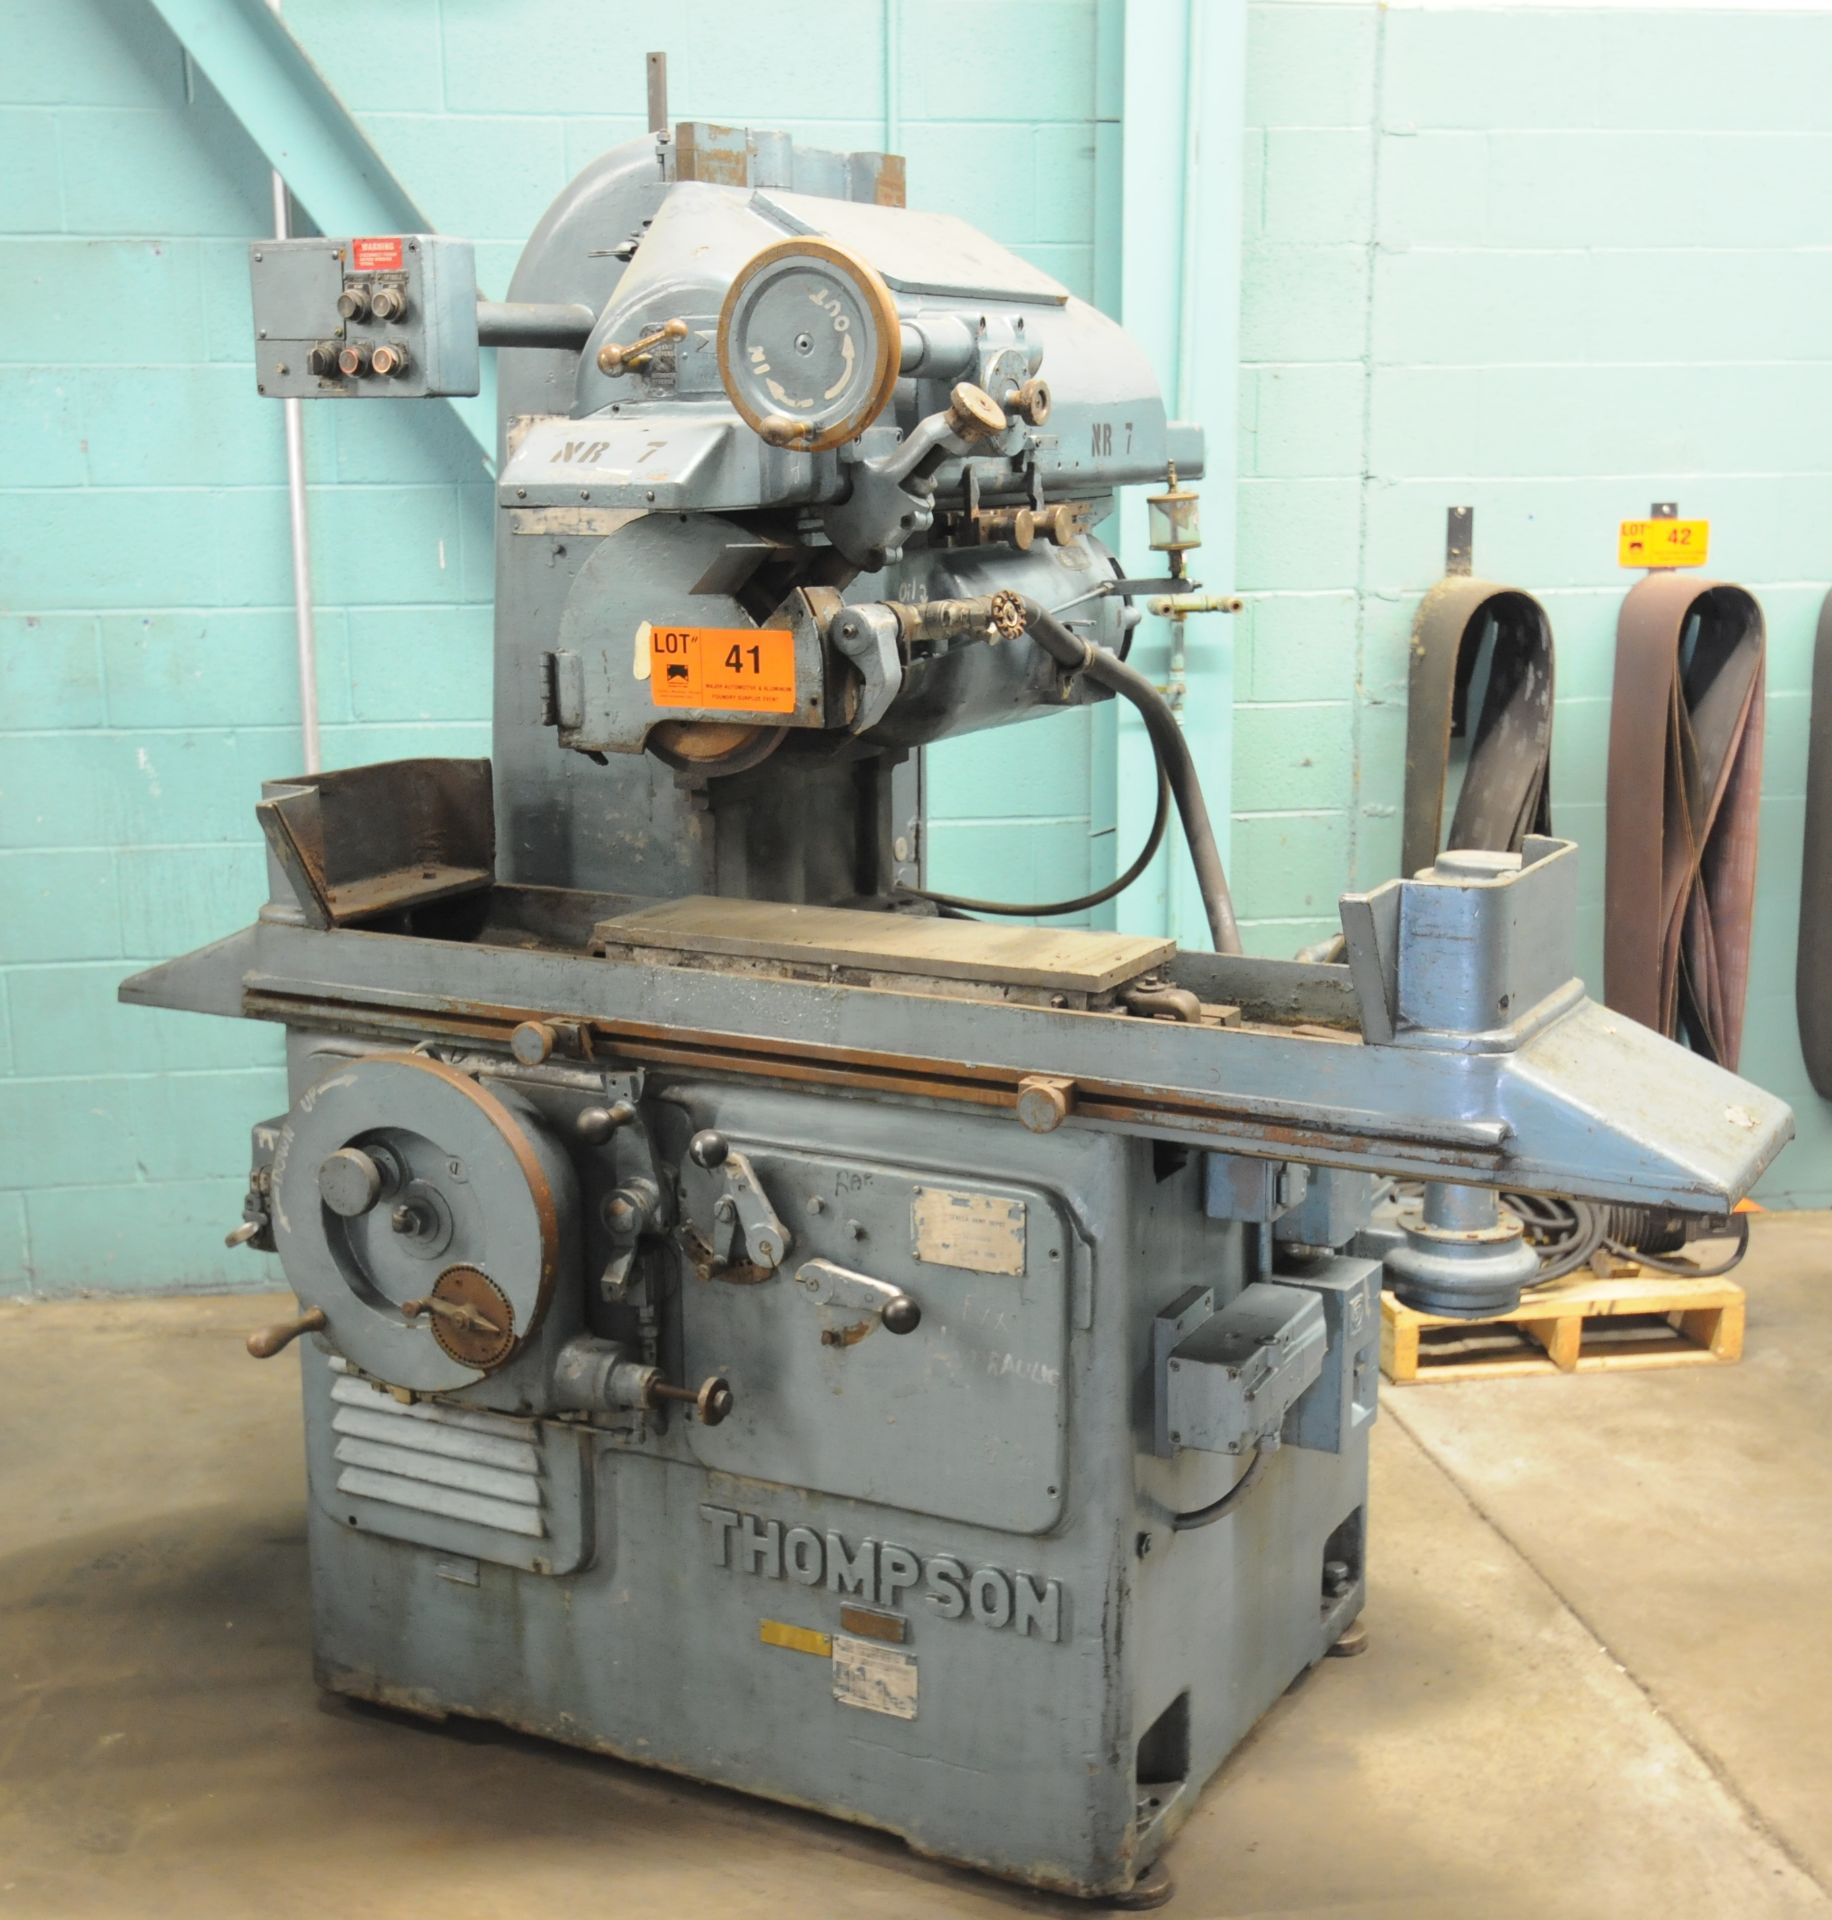 THOMPSON HYDRAULIC SURFACE GRINDER WITH 24" X 8" MAGNETIC CHUCK, 12" WHEEL, 3HP SPINDLE, SPEEDS TO